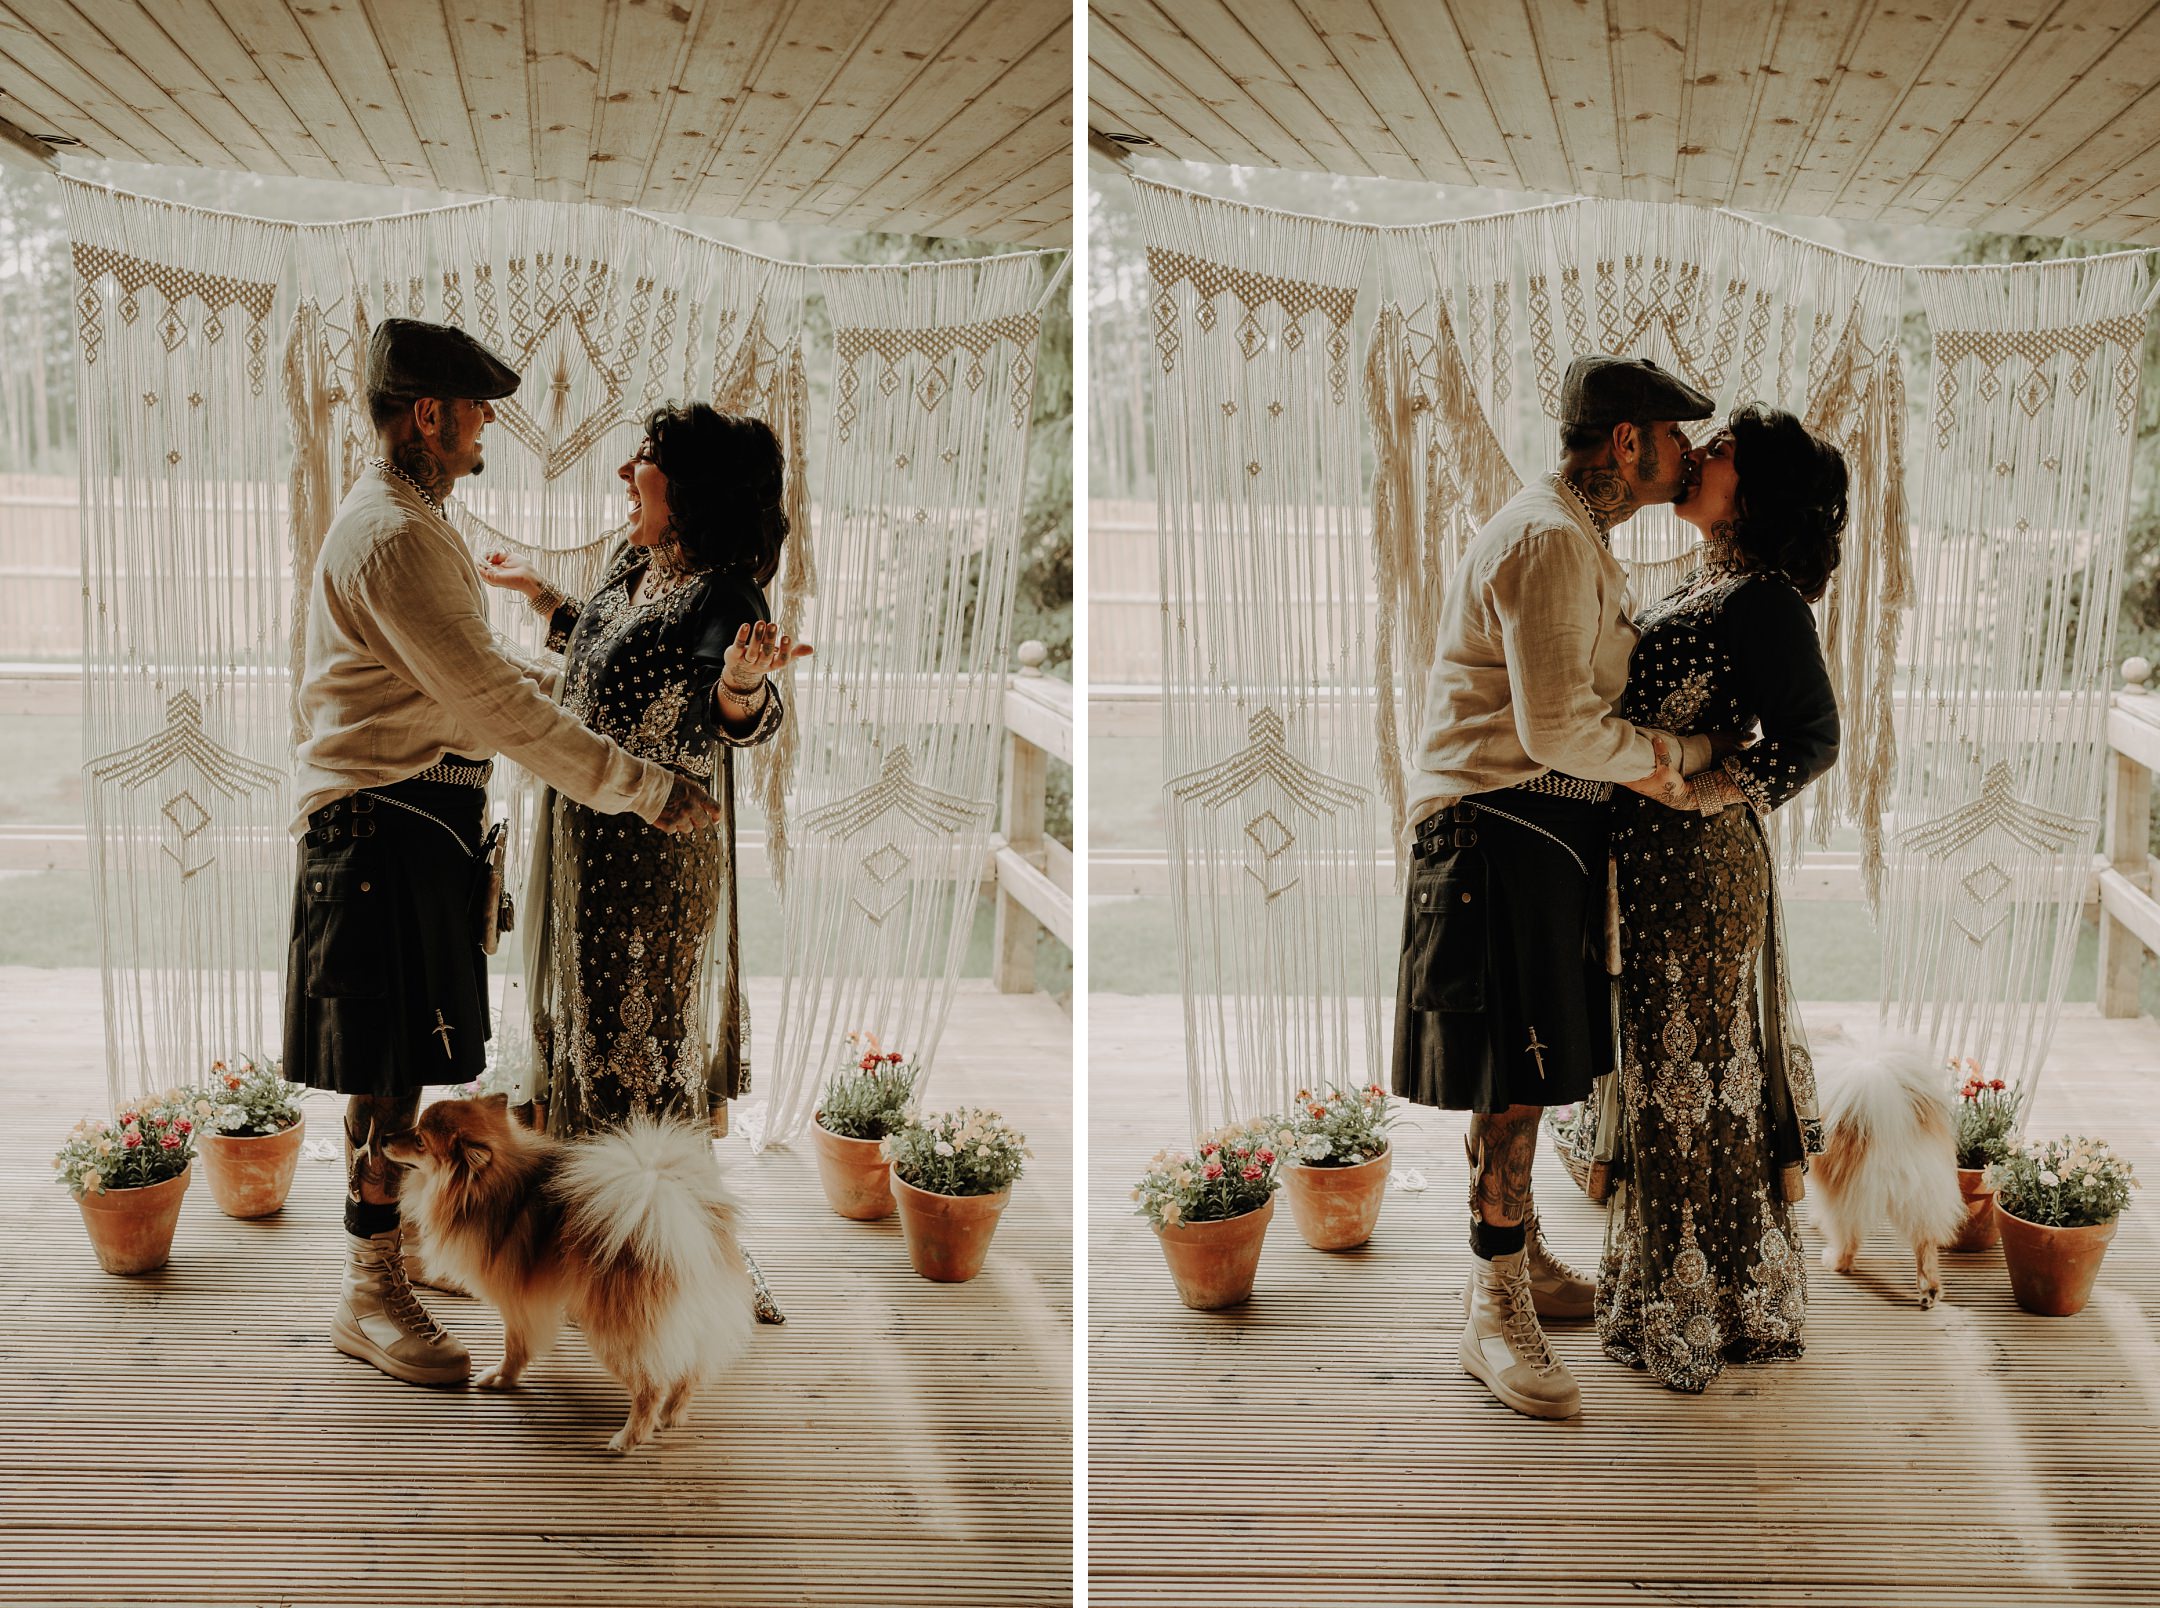 Woodend of Glassel lodges banchory aberdeenshire micro wedding planning ideas ceremony boho tribal rustic macrame backdrop asian indian bridal bride wedding outfit